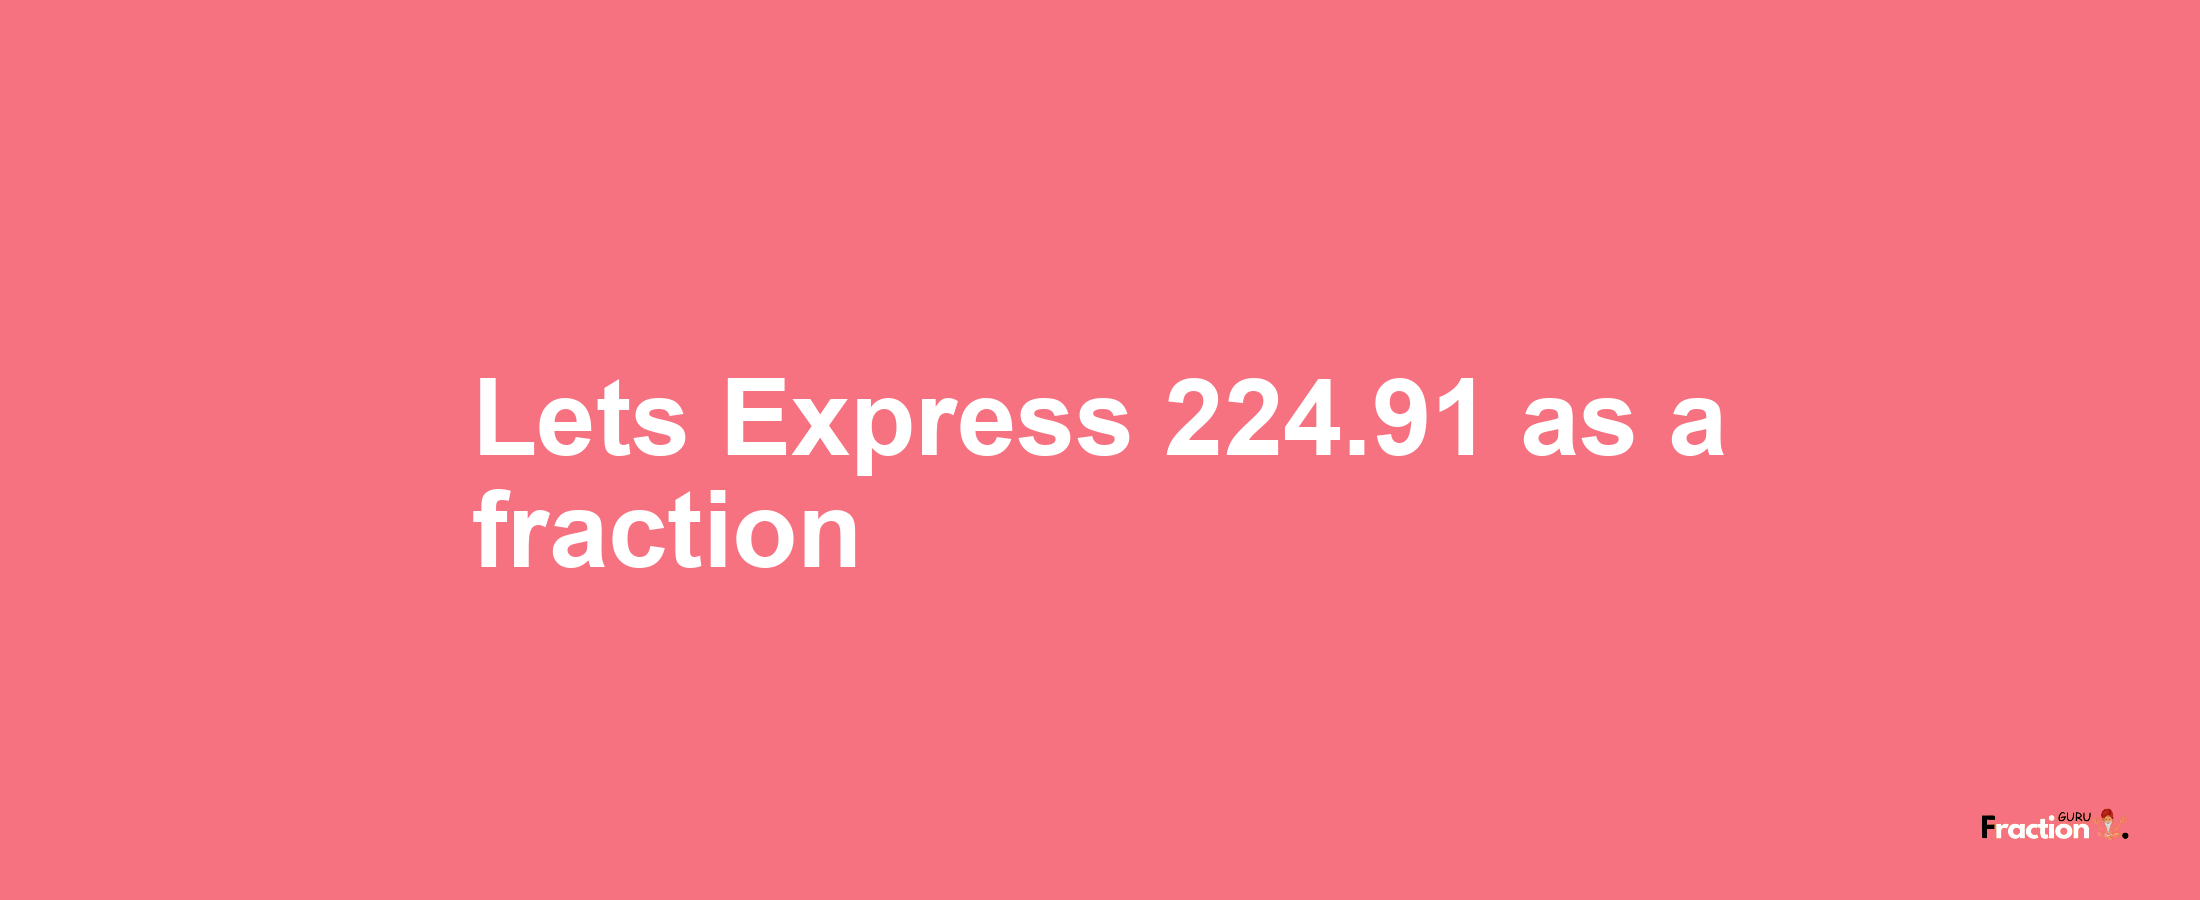 Lets Express 224.91 as afraction